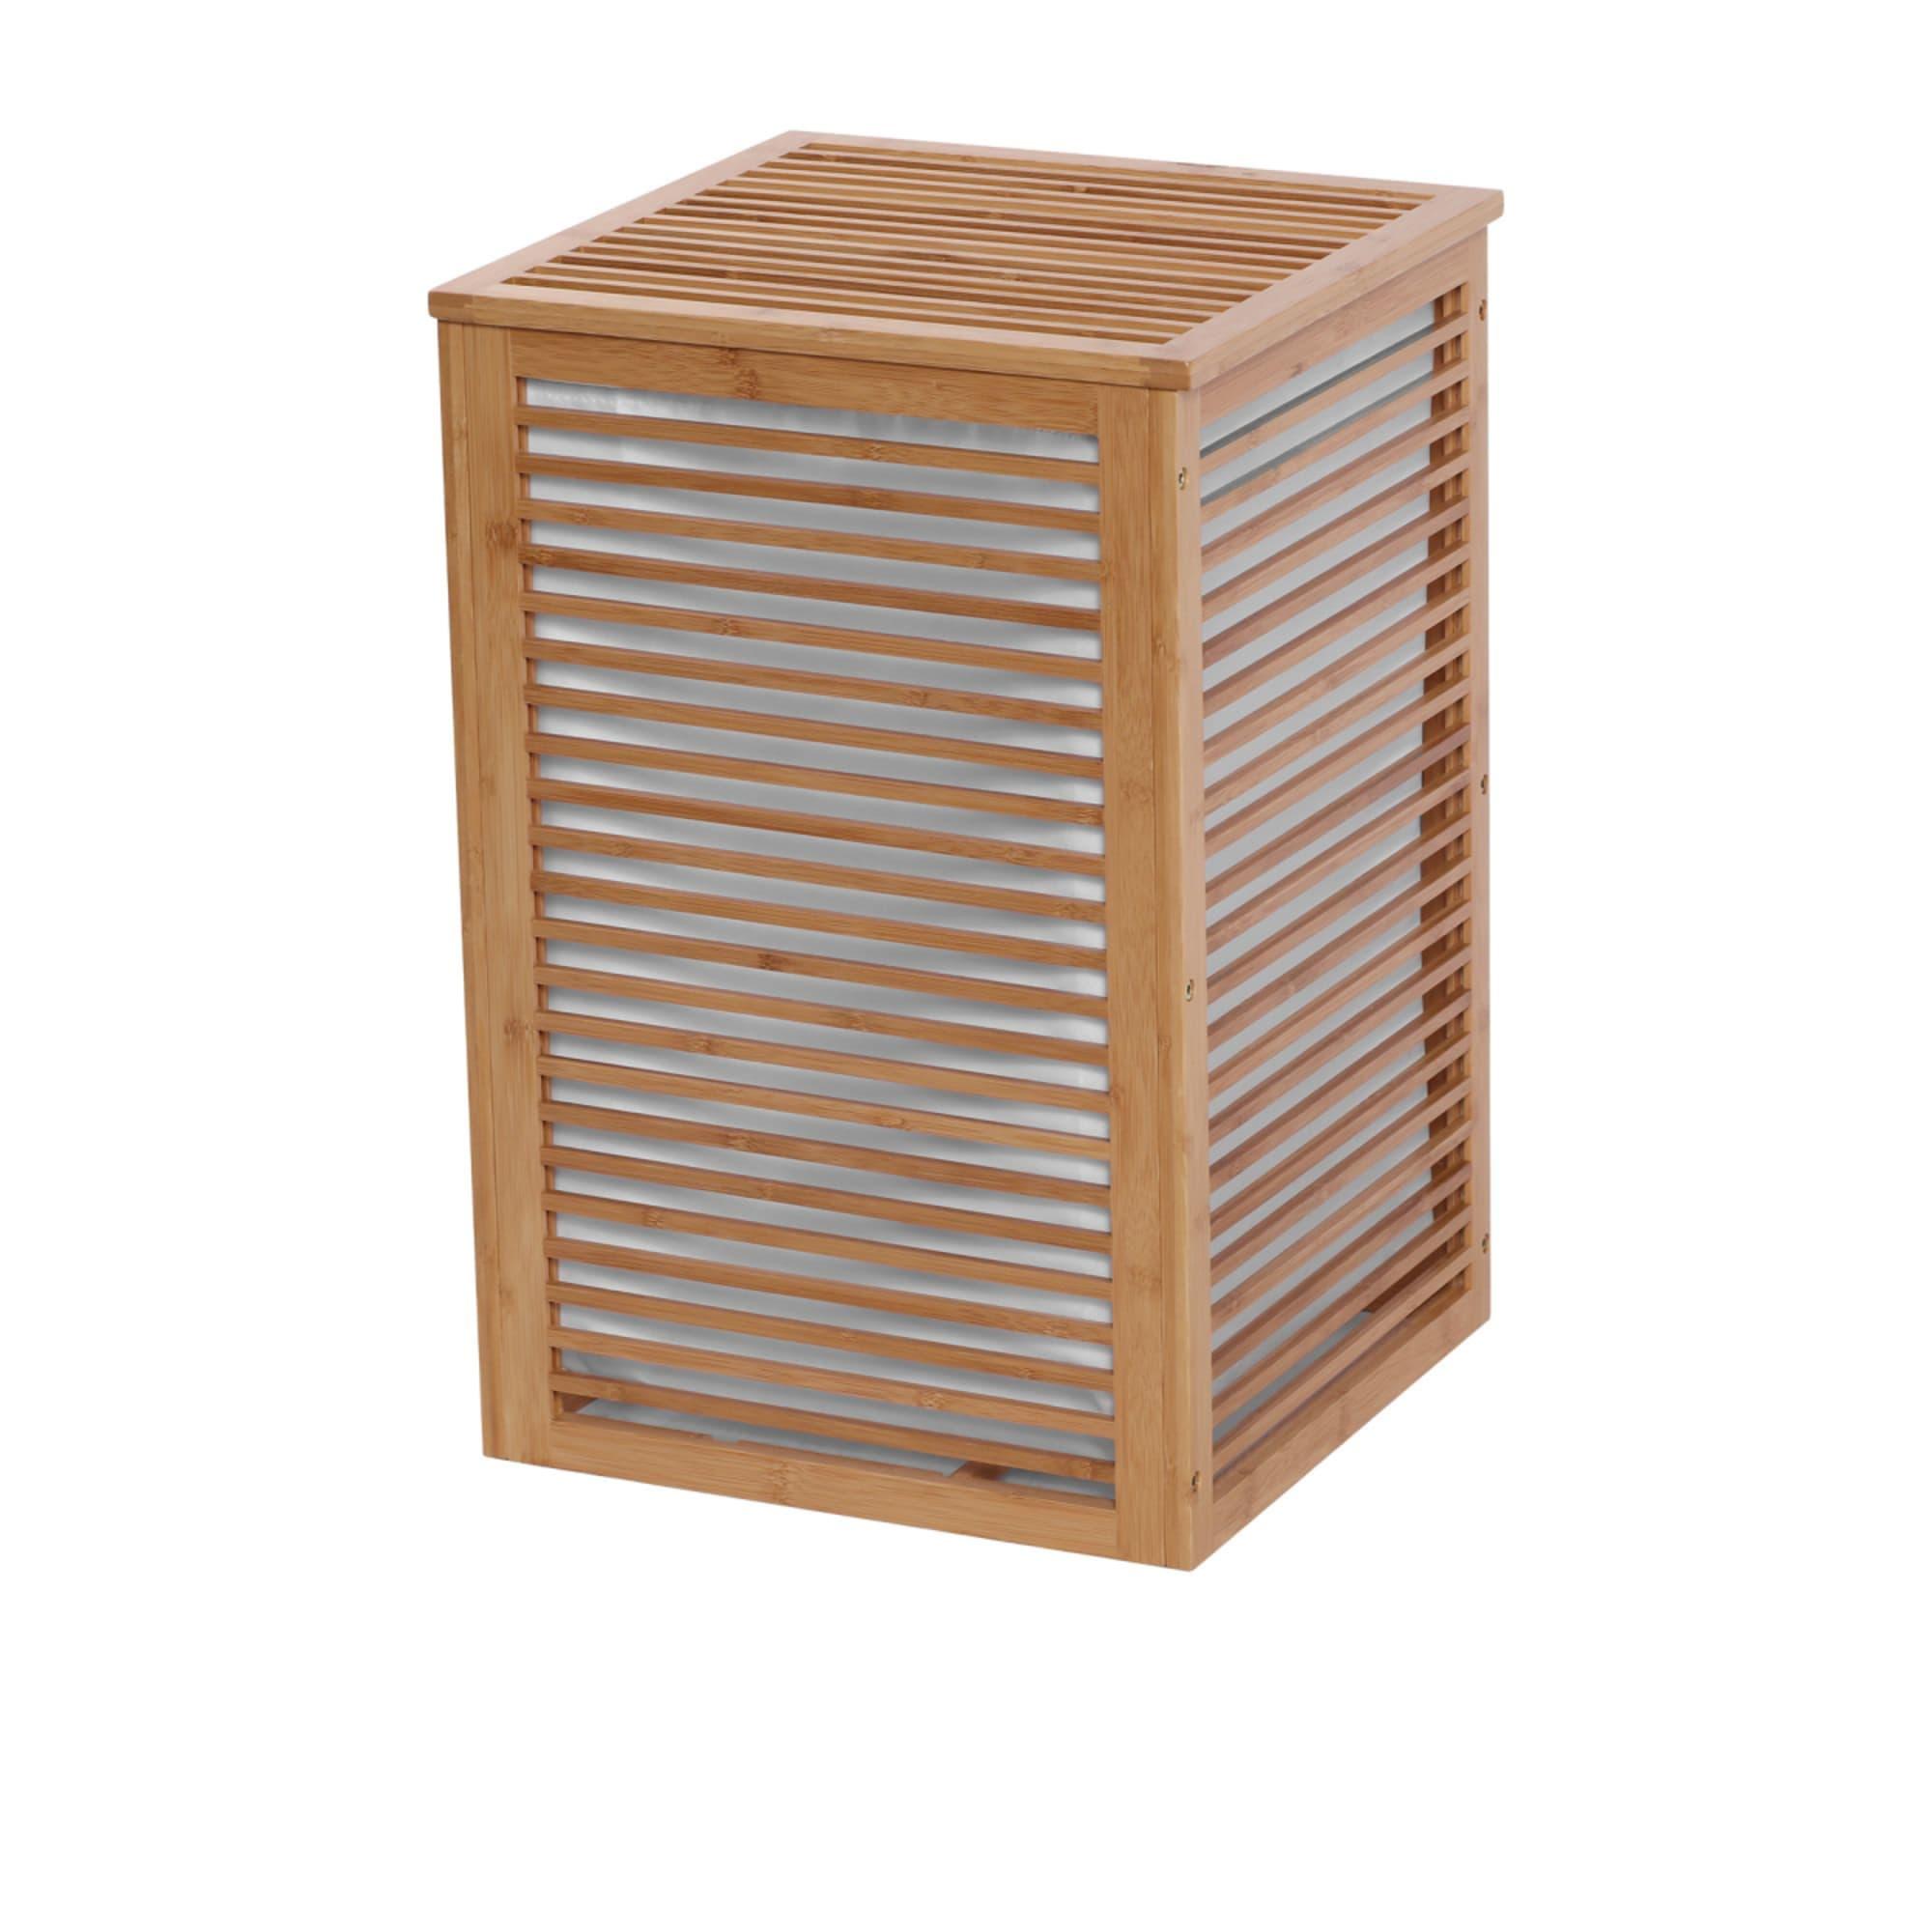 Sherwood Home Square Colllapsible Bamboo Laundry Hamper Image 3